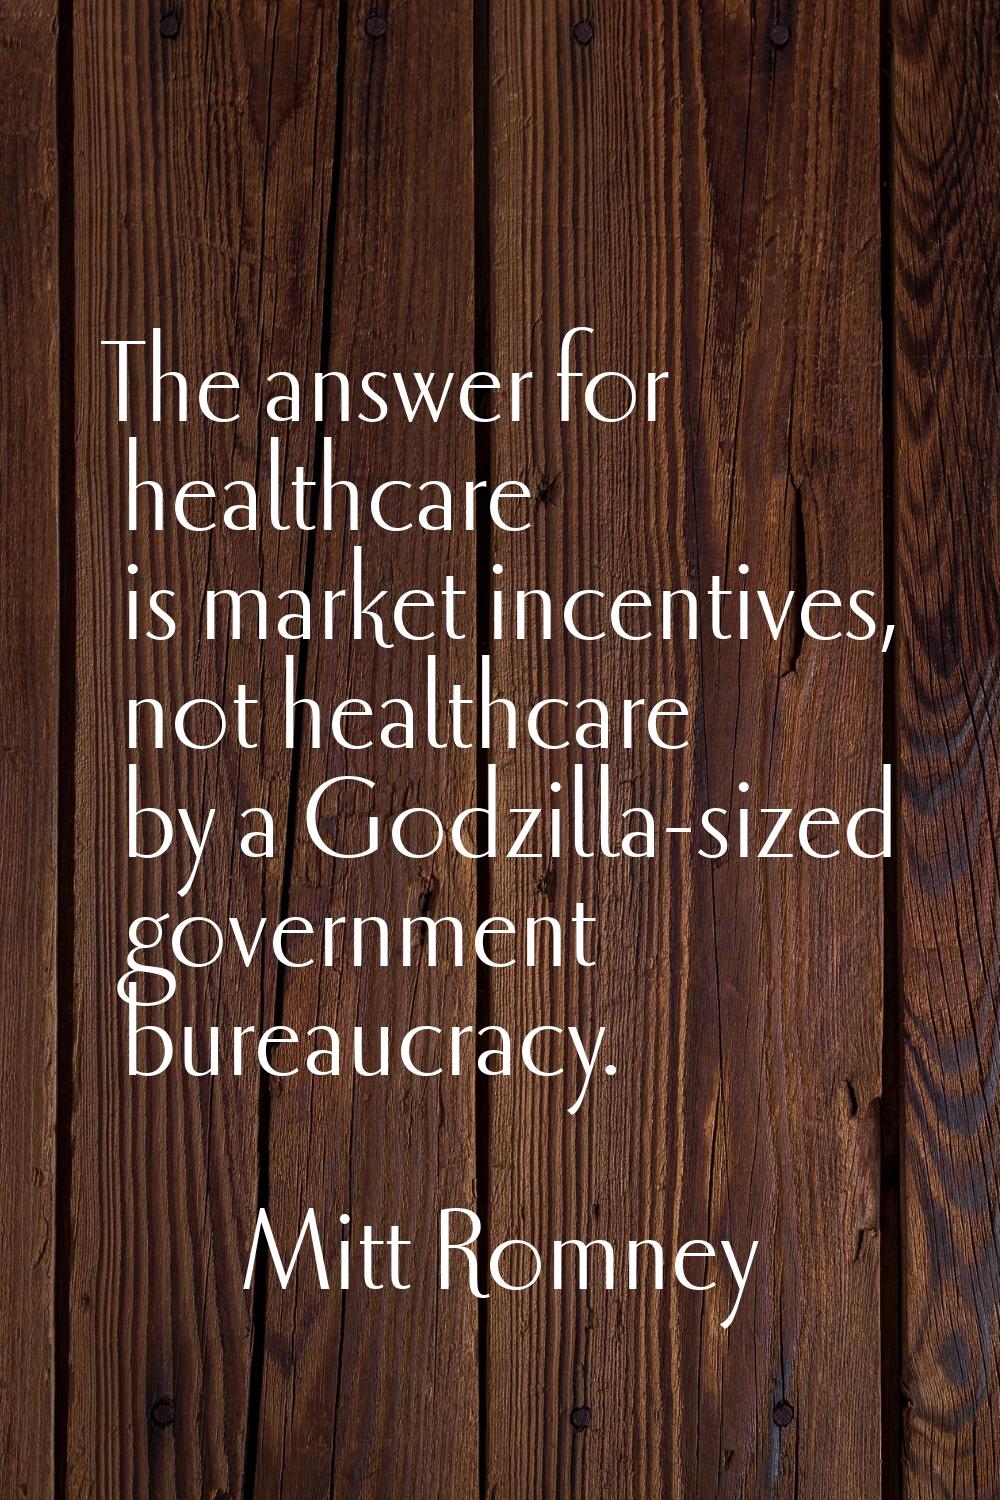 The answer for healthcare is market incentives, not healthcare by a Godzilla-sized government burea